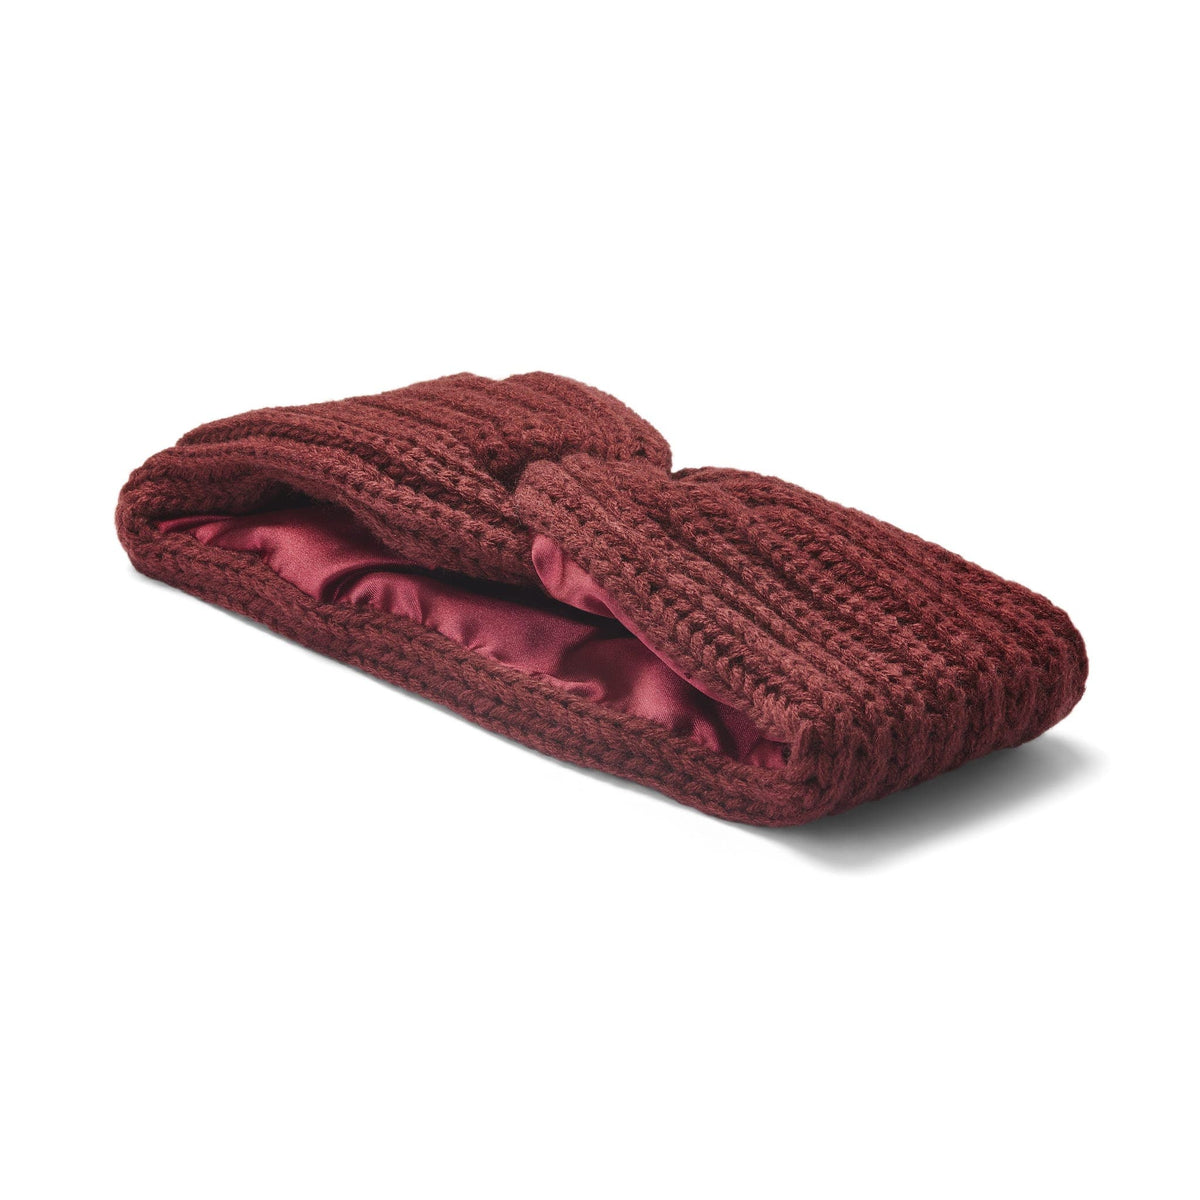 Only Curls Satin Lined Knitted Headband - Burgundy - Only Curls